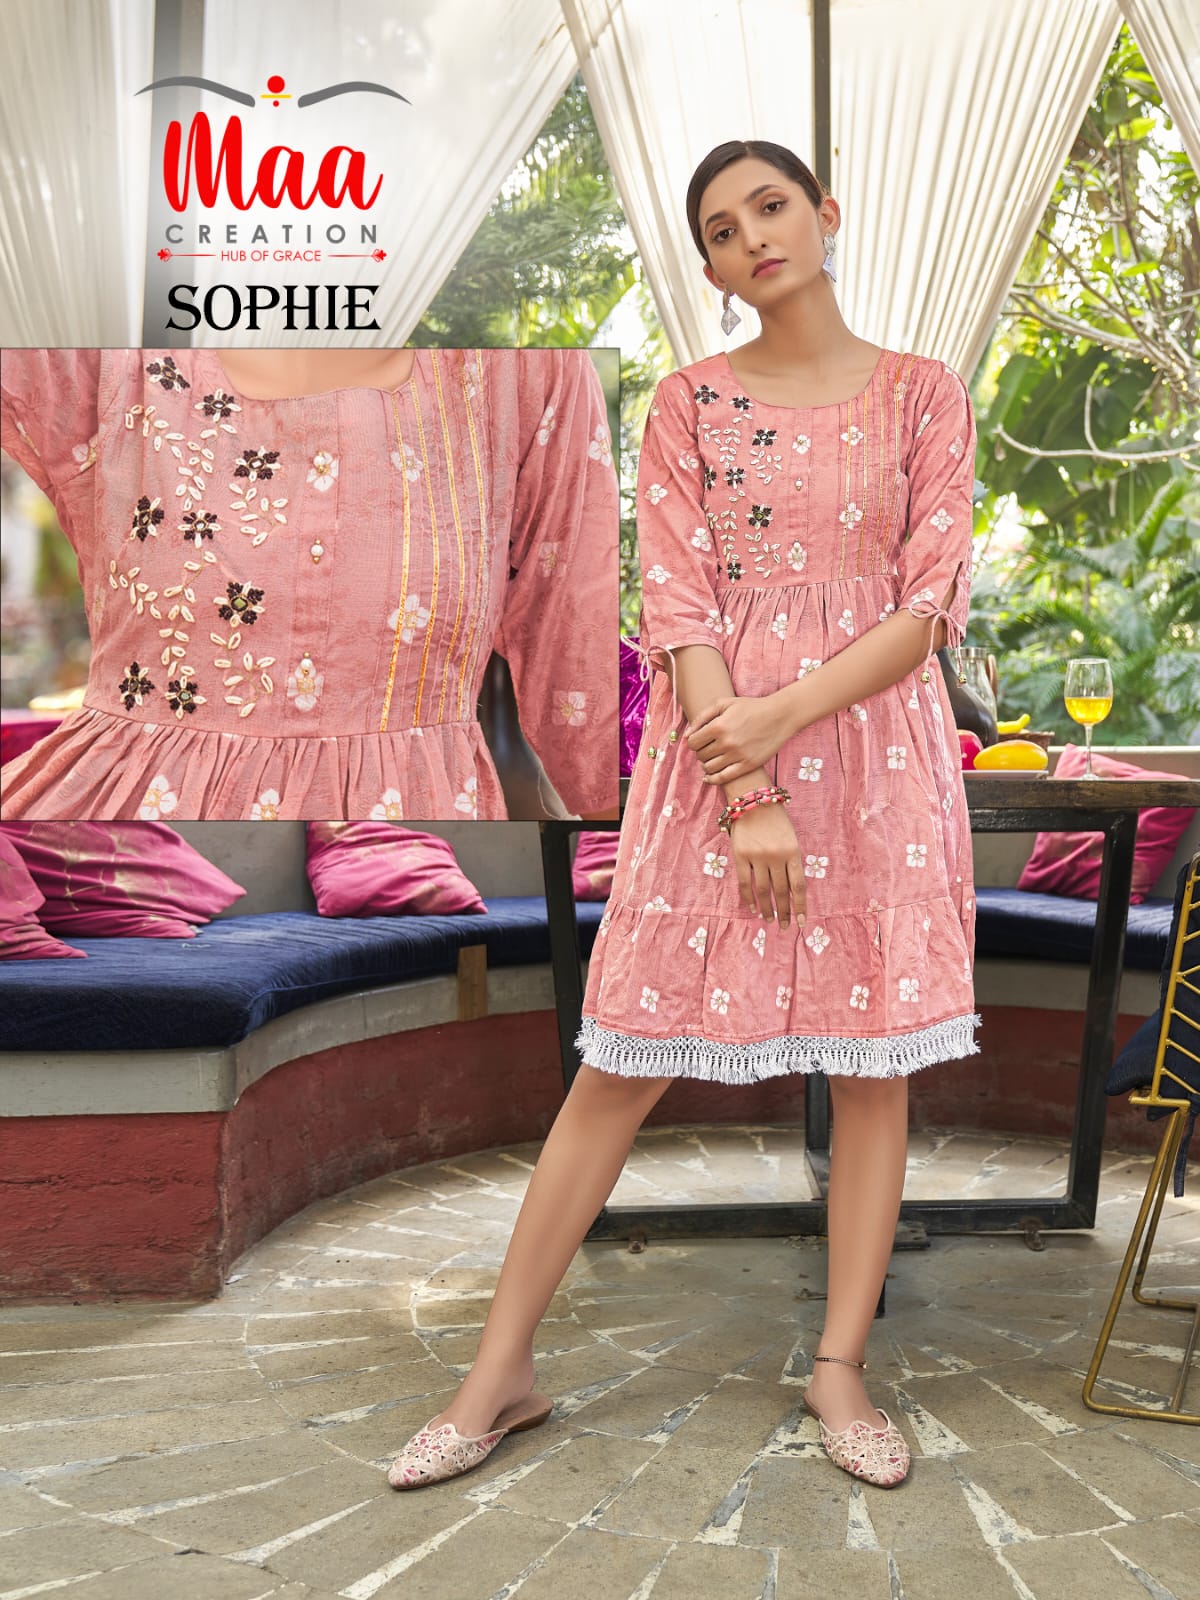 maa creation sophie cotton new and modern style kurti single